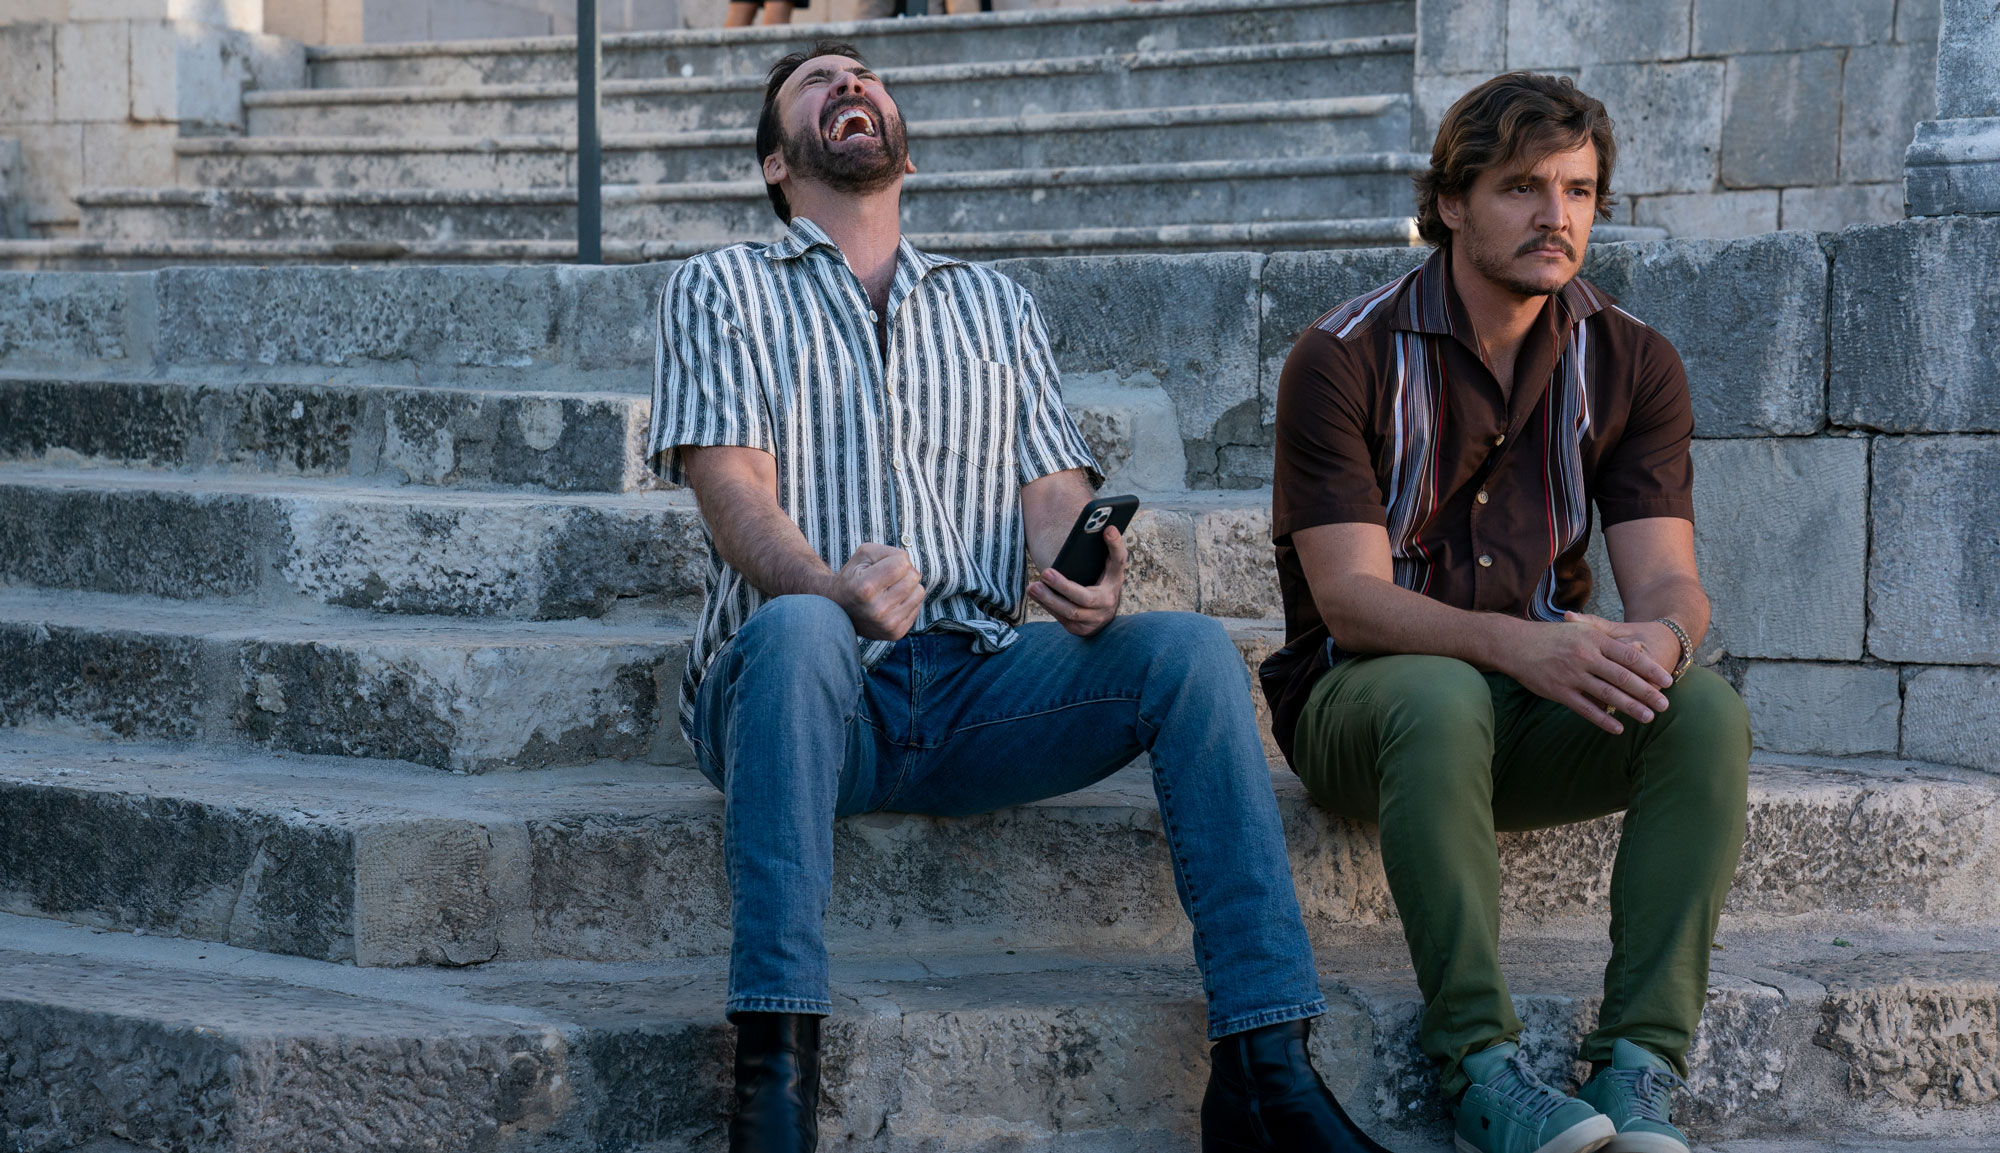 Nicholas Cage and Pedro Pascal in "The Unbearable Weight of Massive Talent"